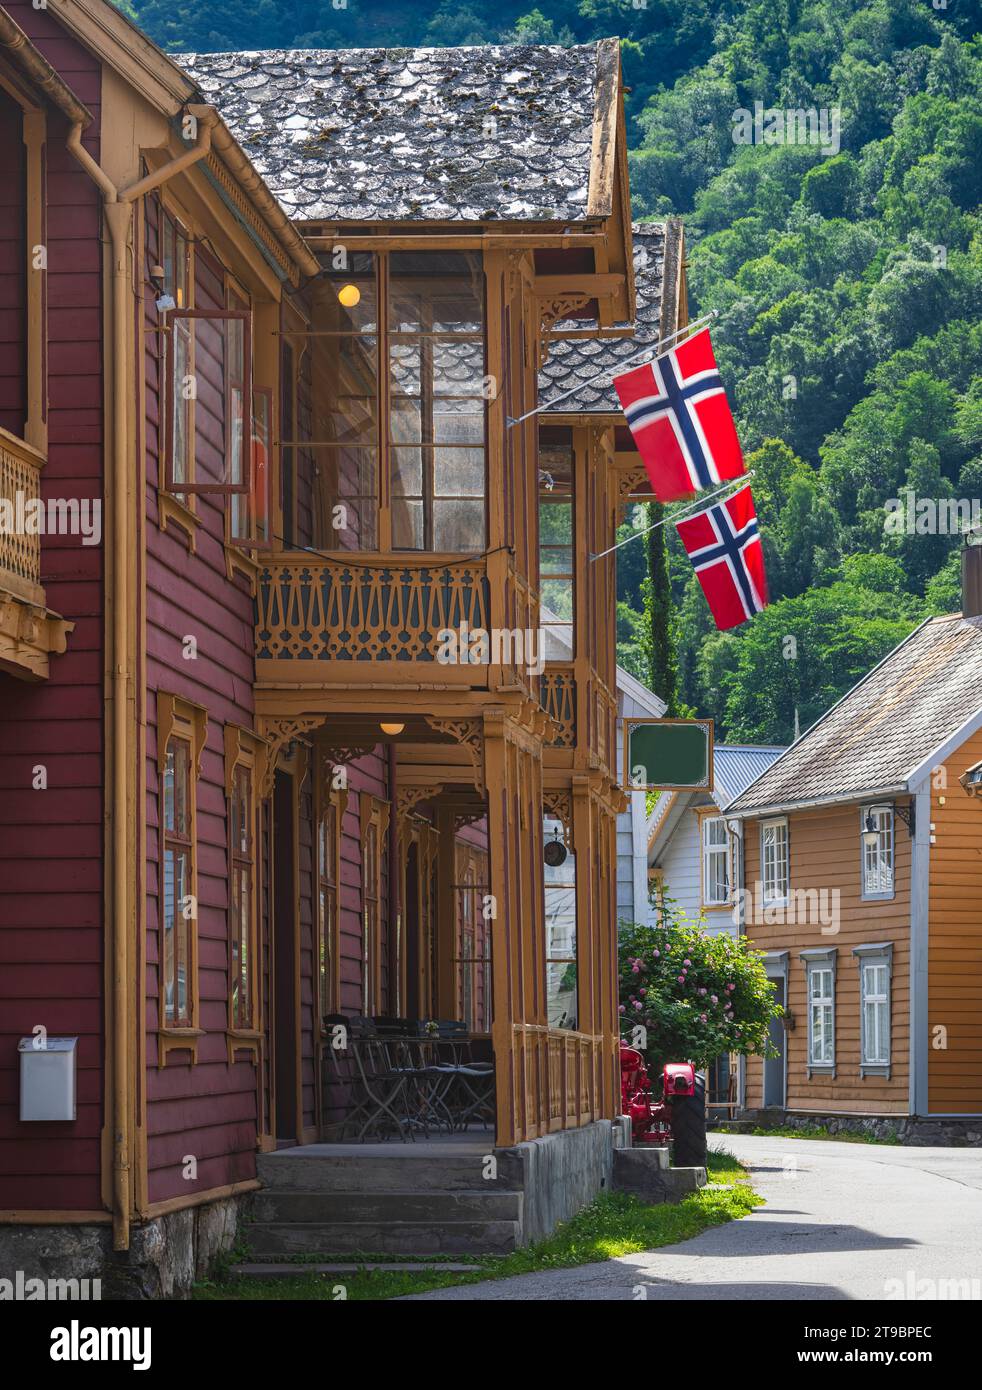 View of wooden house with Danish flags on porch Stock Photo